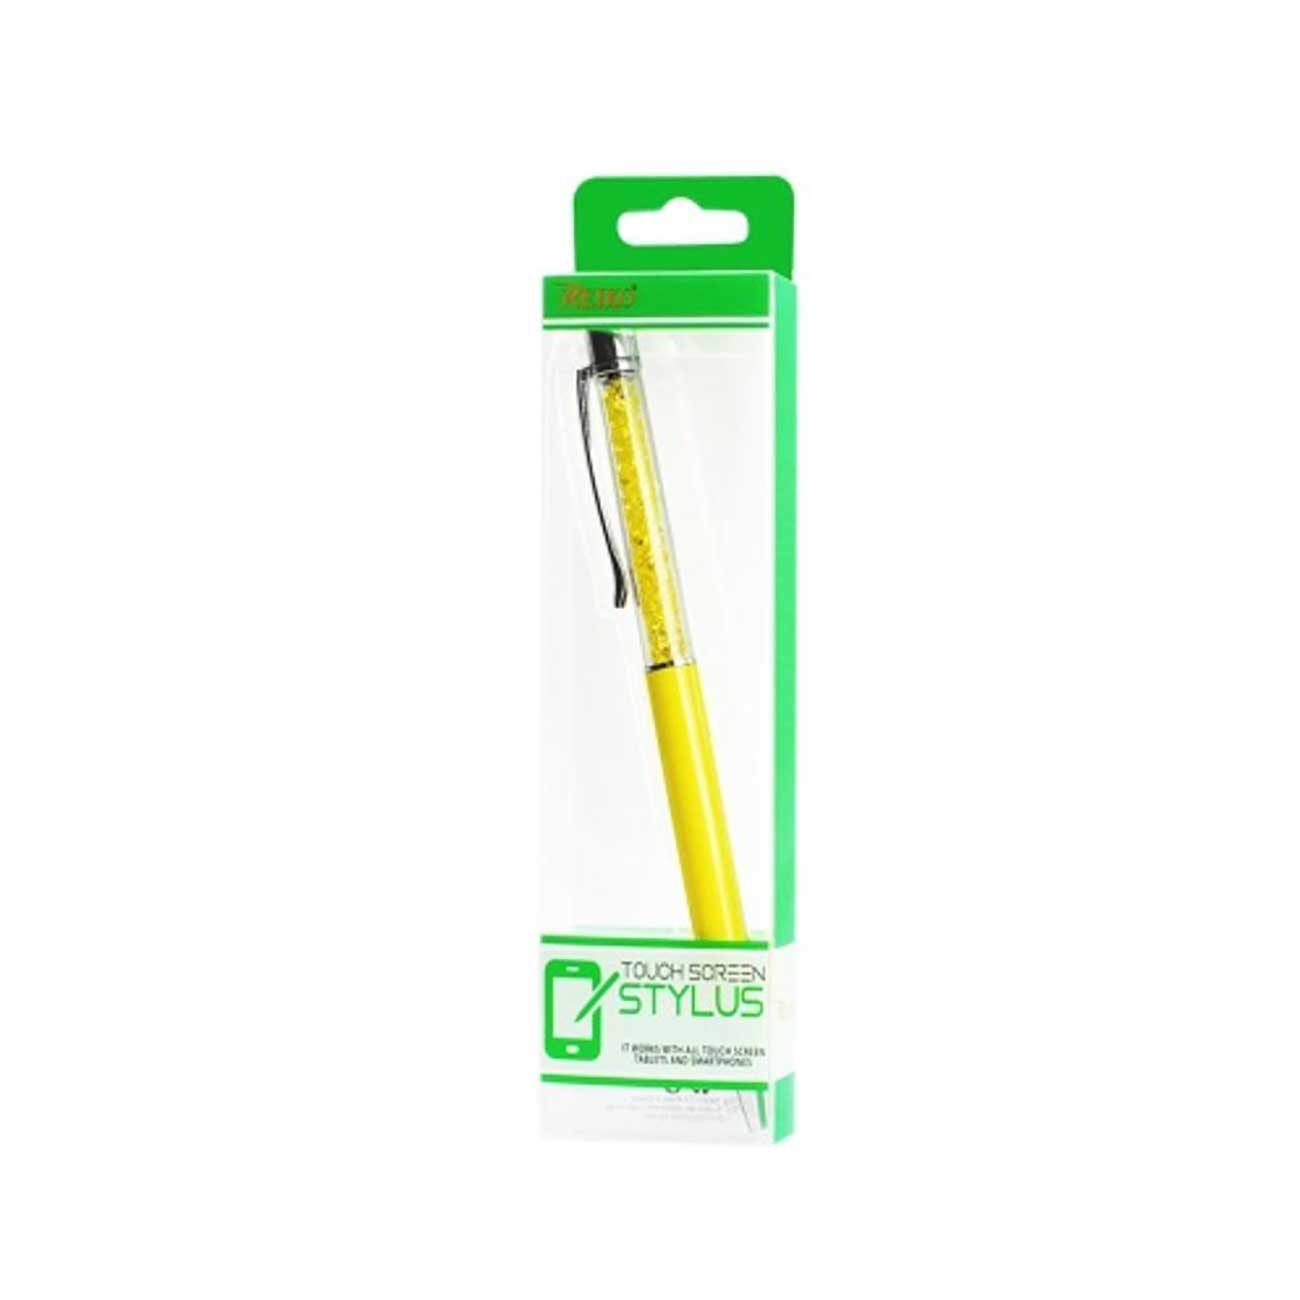 Crystal Stylus Touch Screen With Ink Pen In Yellow